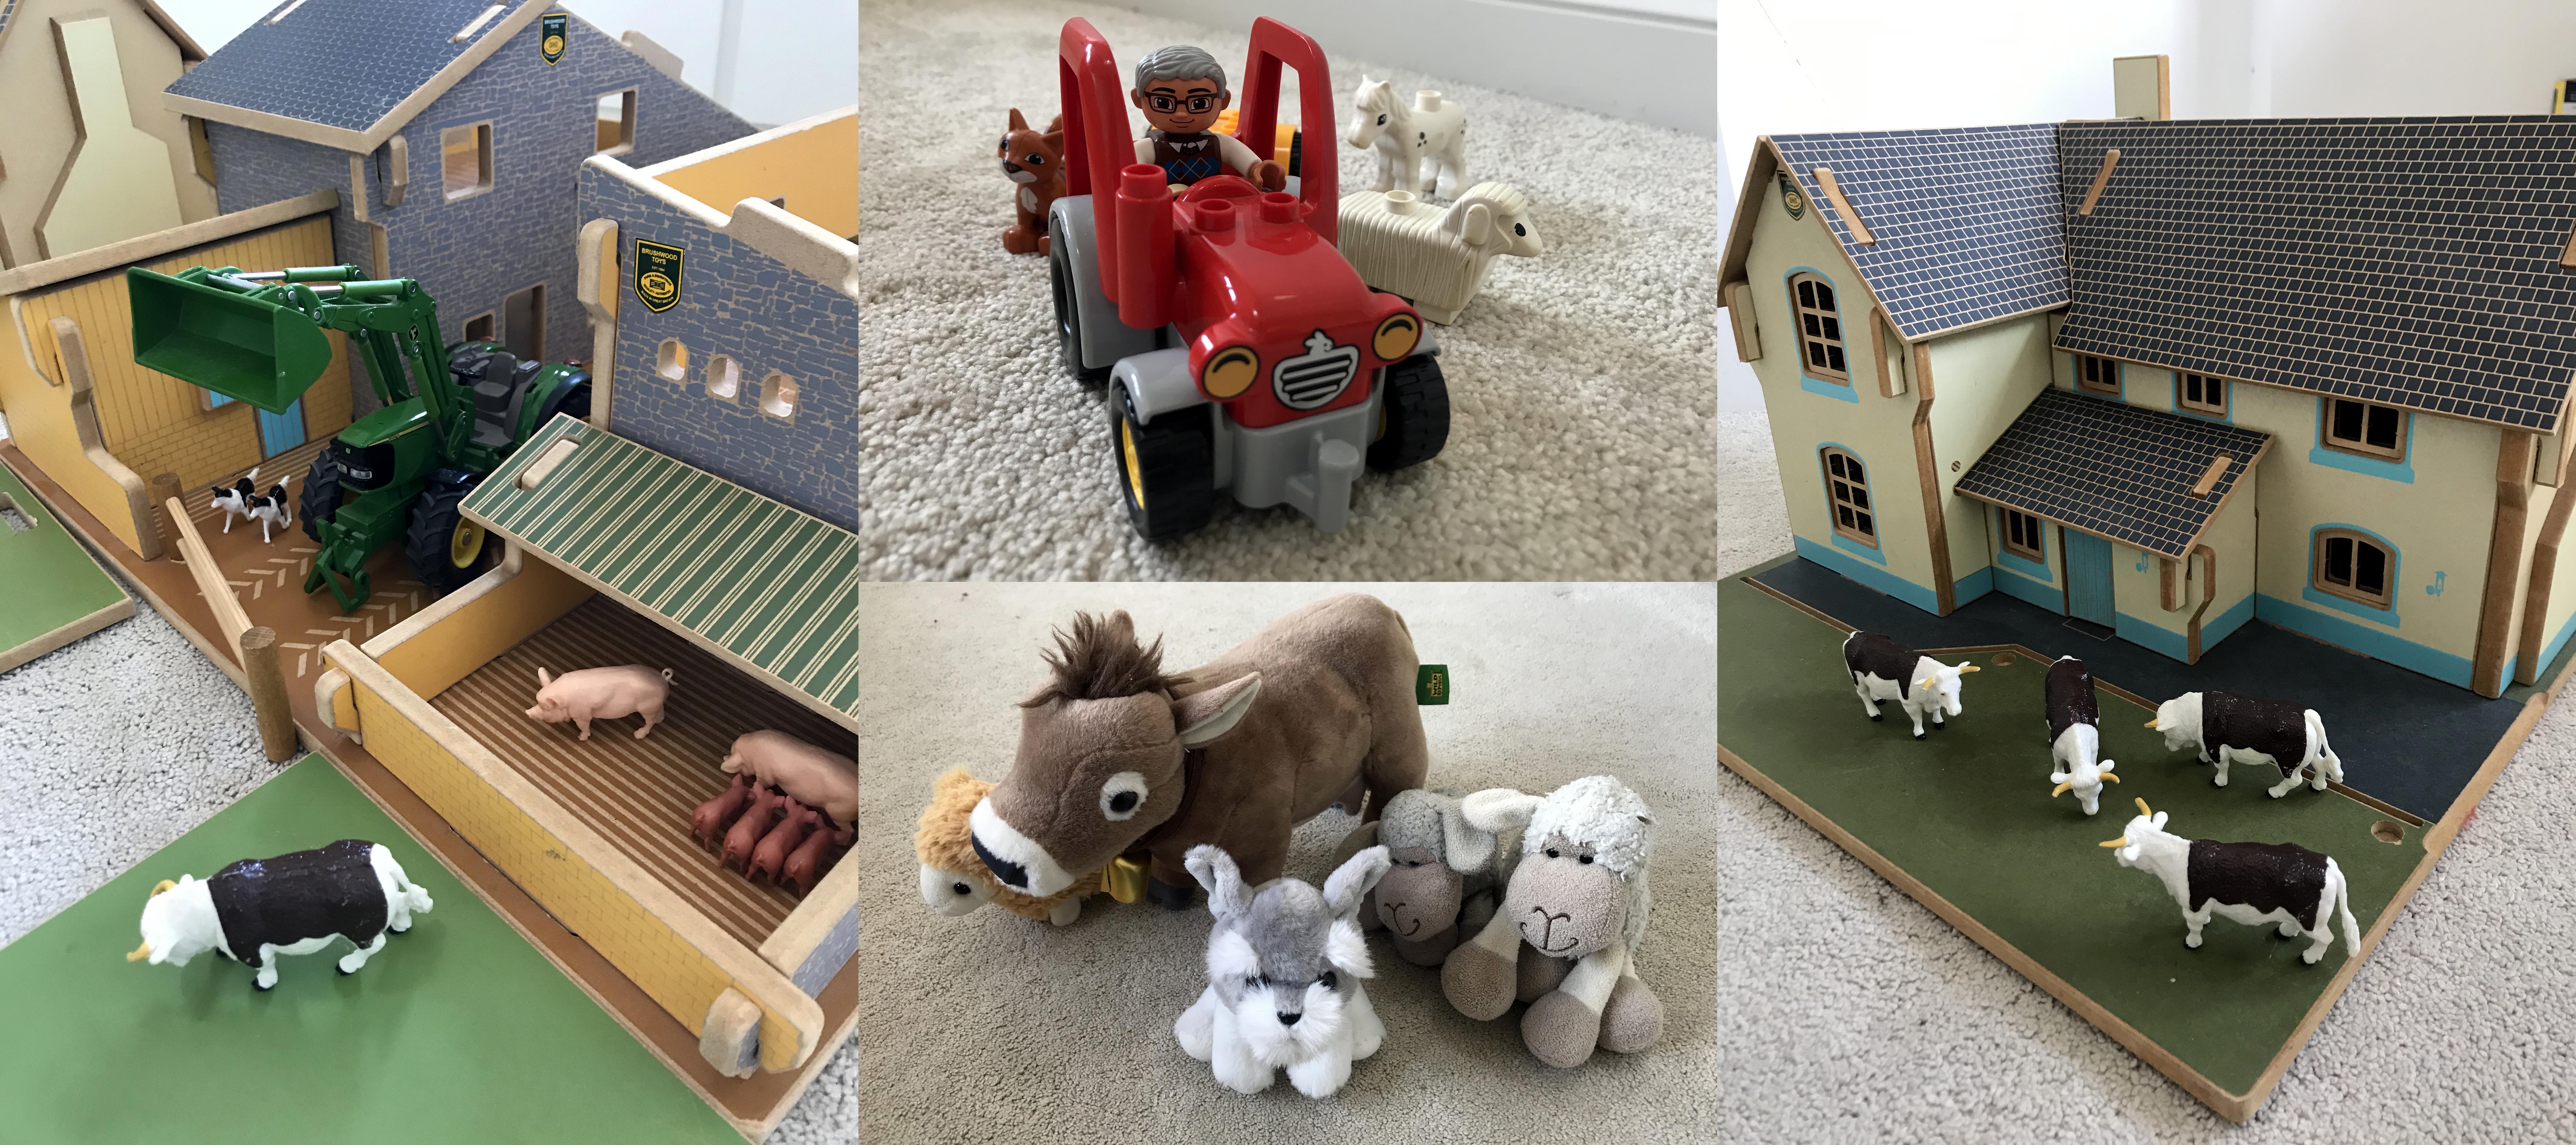 four different images in one (clockwise from left): a farm playset with buildings, tractor, and farm animals, a Lego Duplo tractor and animal figures, a toy farmhouse with animal figures, and a selection of farm animal cuddlies.